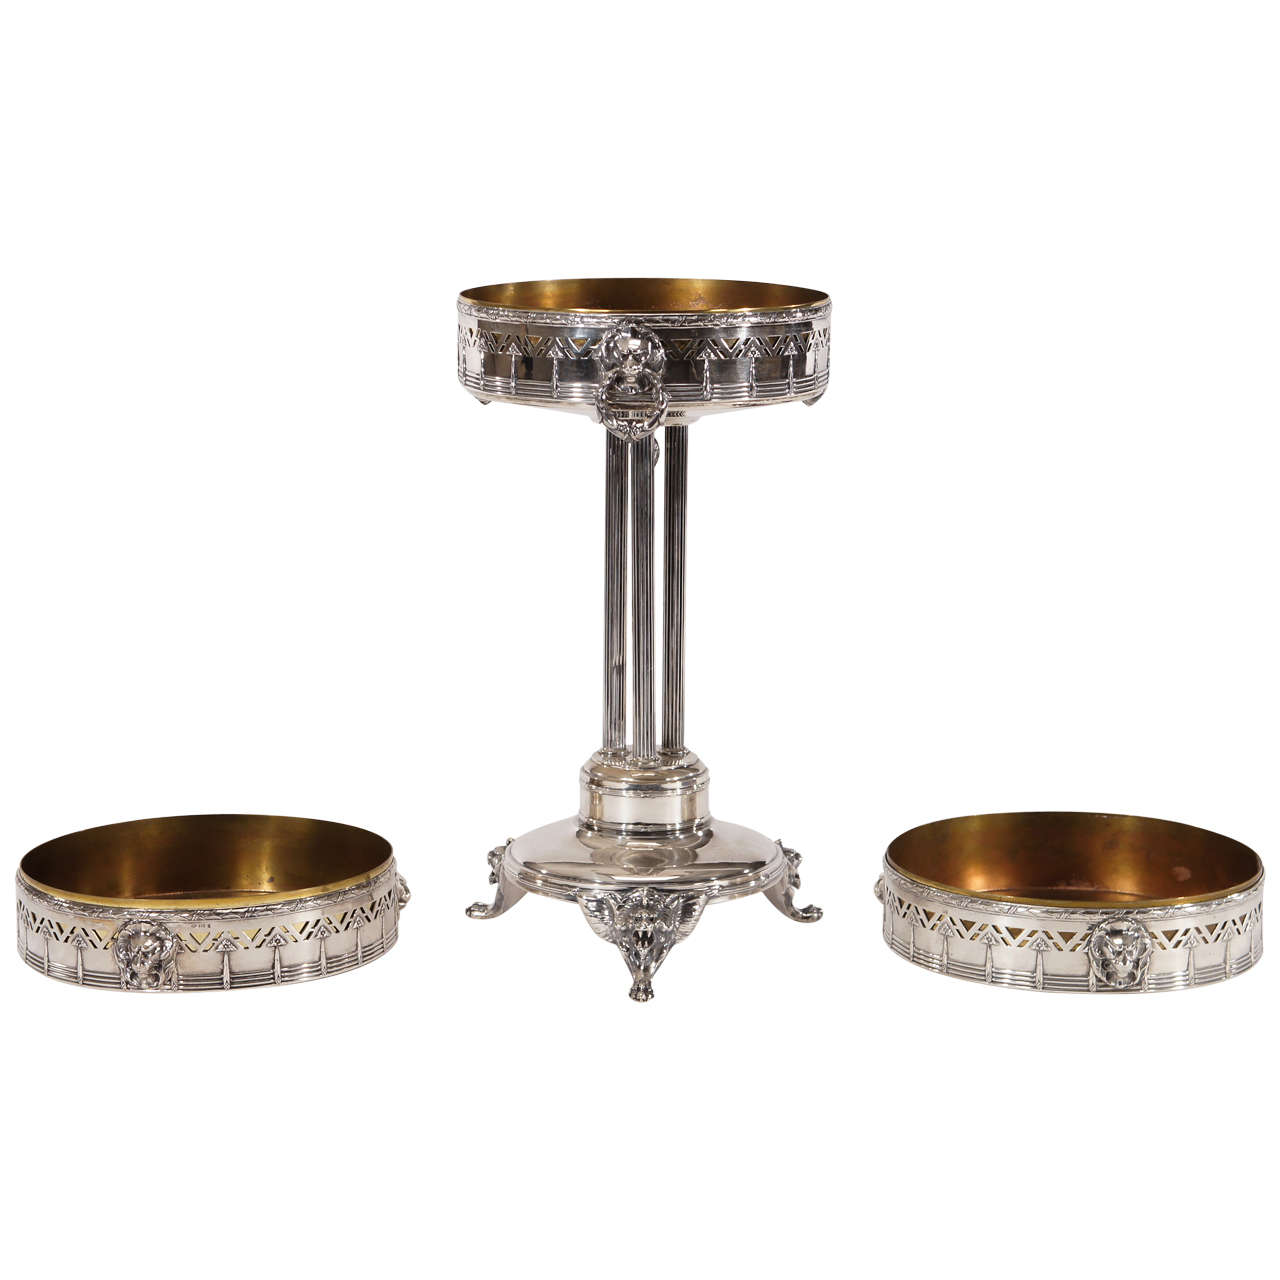 Three-Piece Continental Silver Centerpiece Set with Lion's Head Decorations